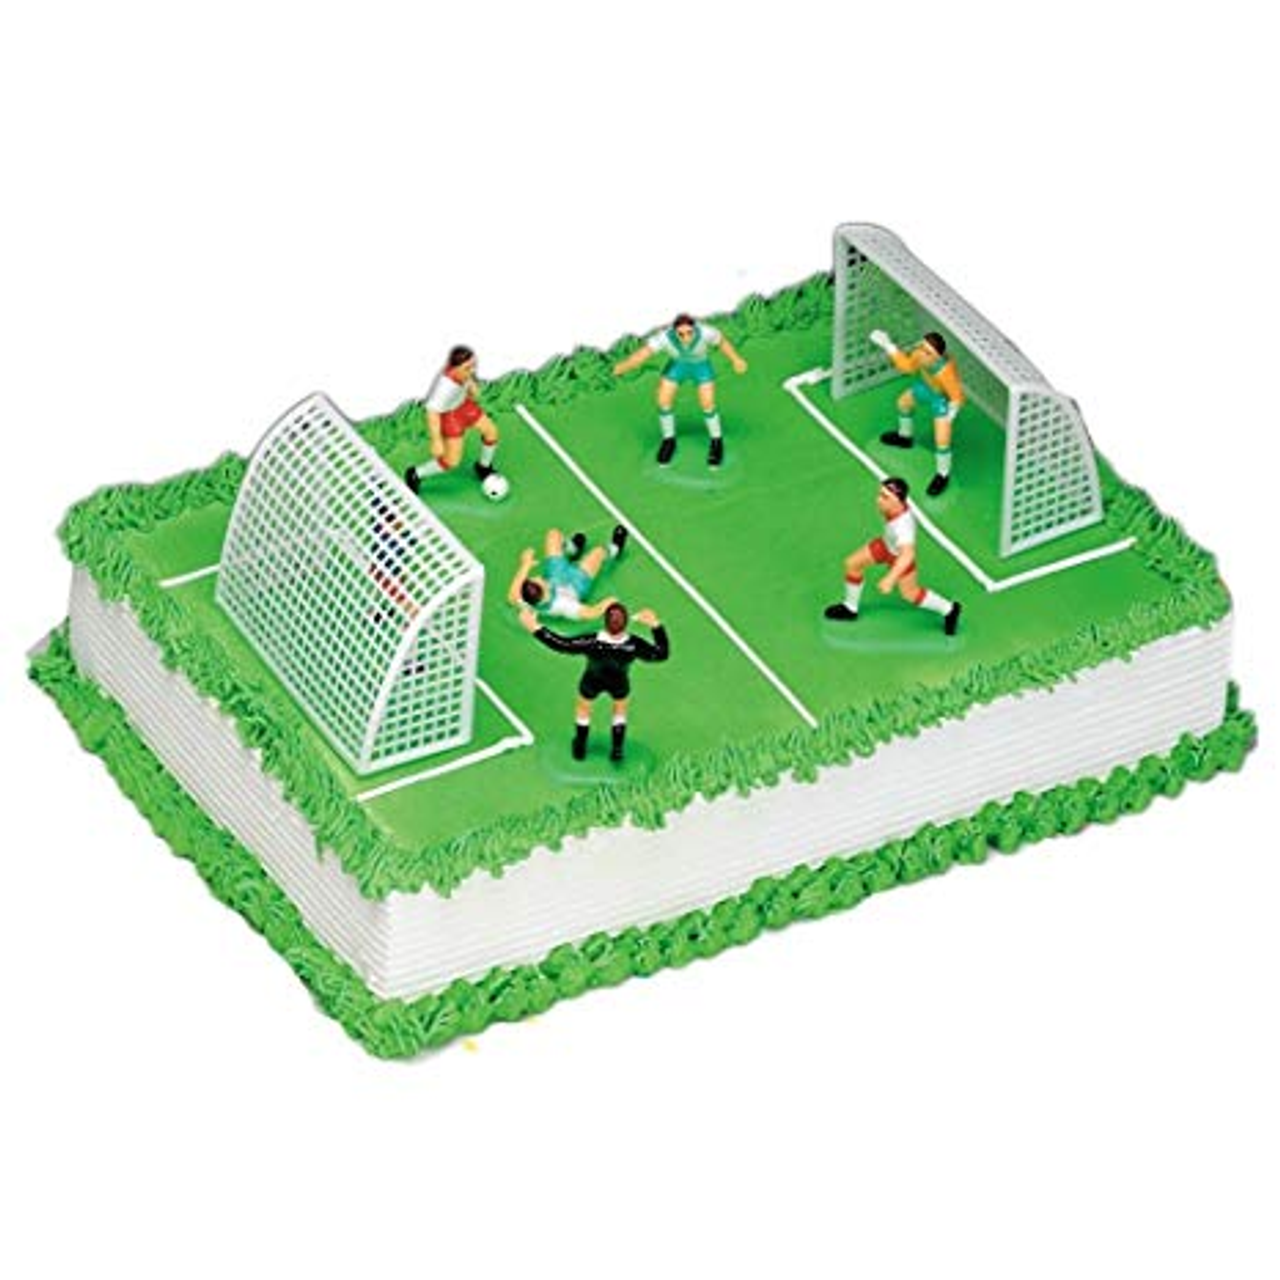 Soccer Cake Topper Kit - Perfect for Game Day Celebrations and